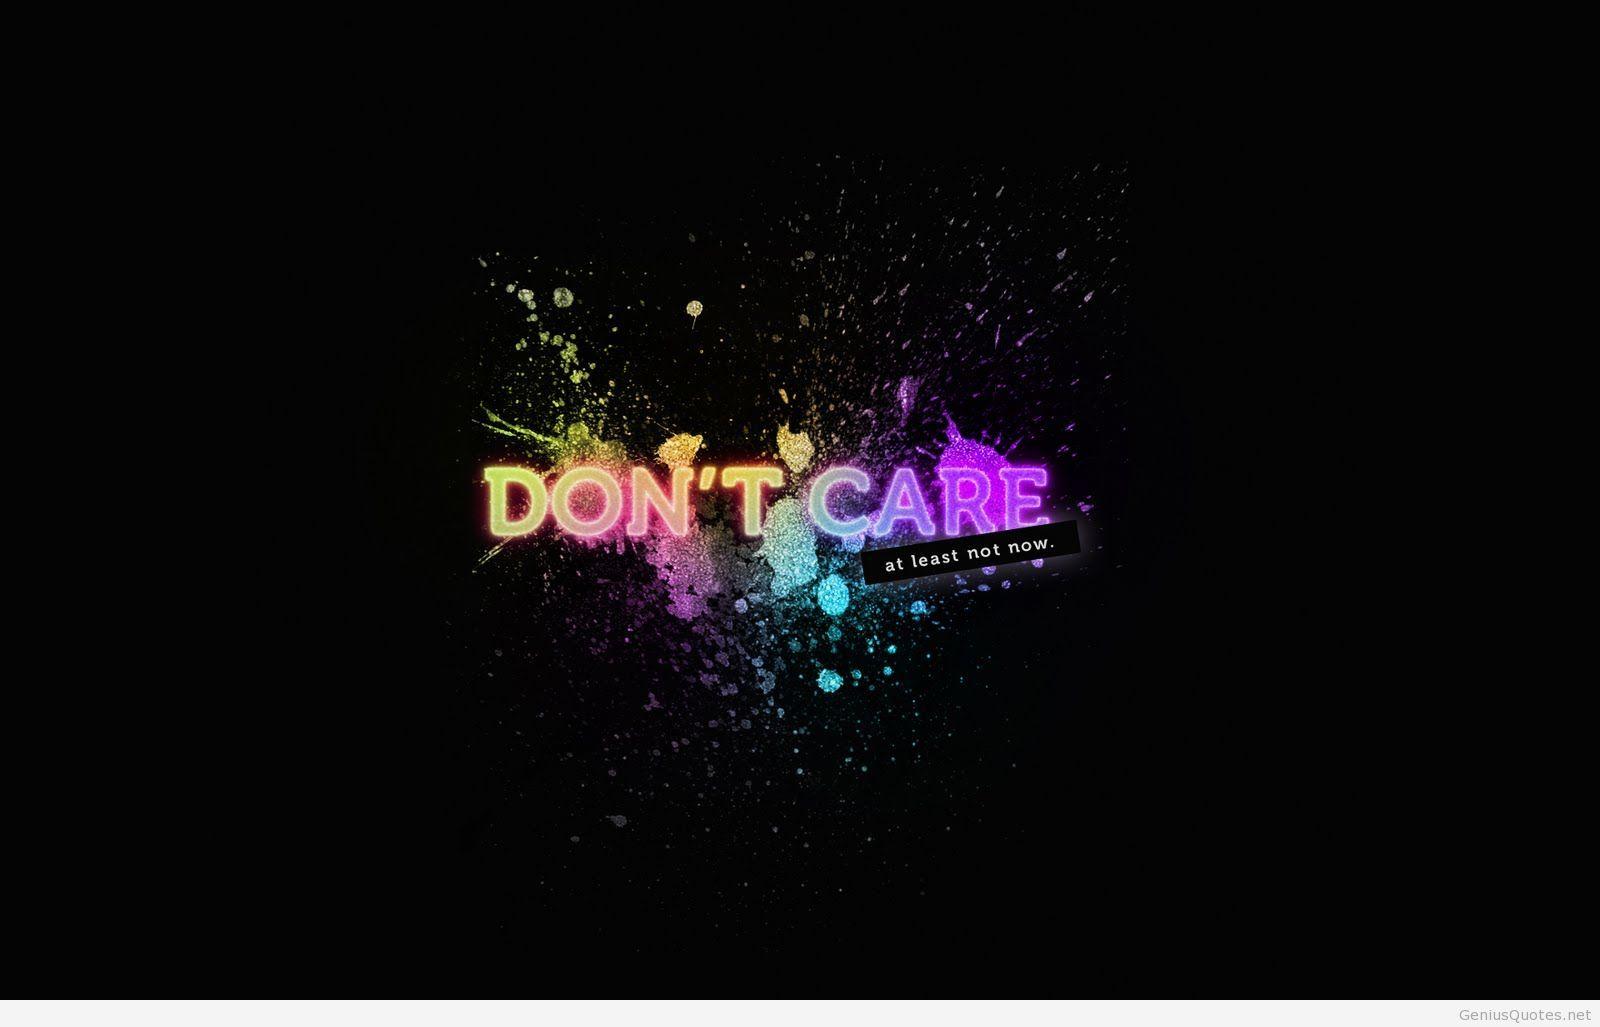 I don't care wallpaper and quotes